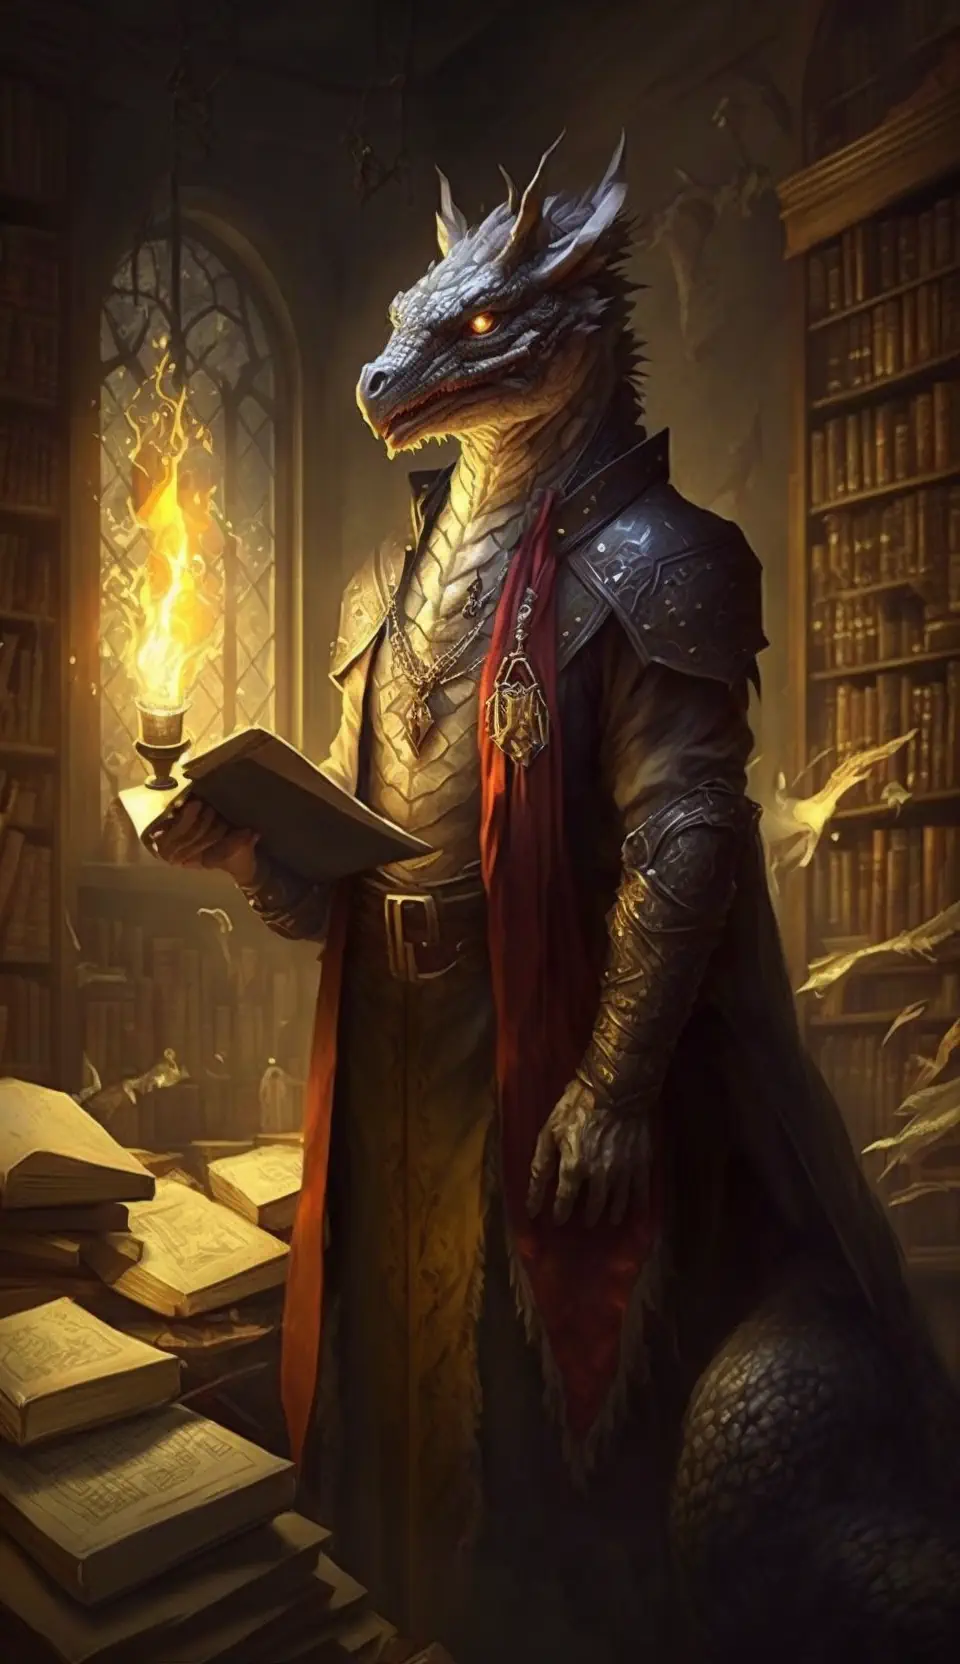 Drapet_dragon_librarian_in_medieval_library_mystical_lighting_t_c62218a2-4280-4371-92bf-0f80f42d3009